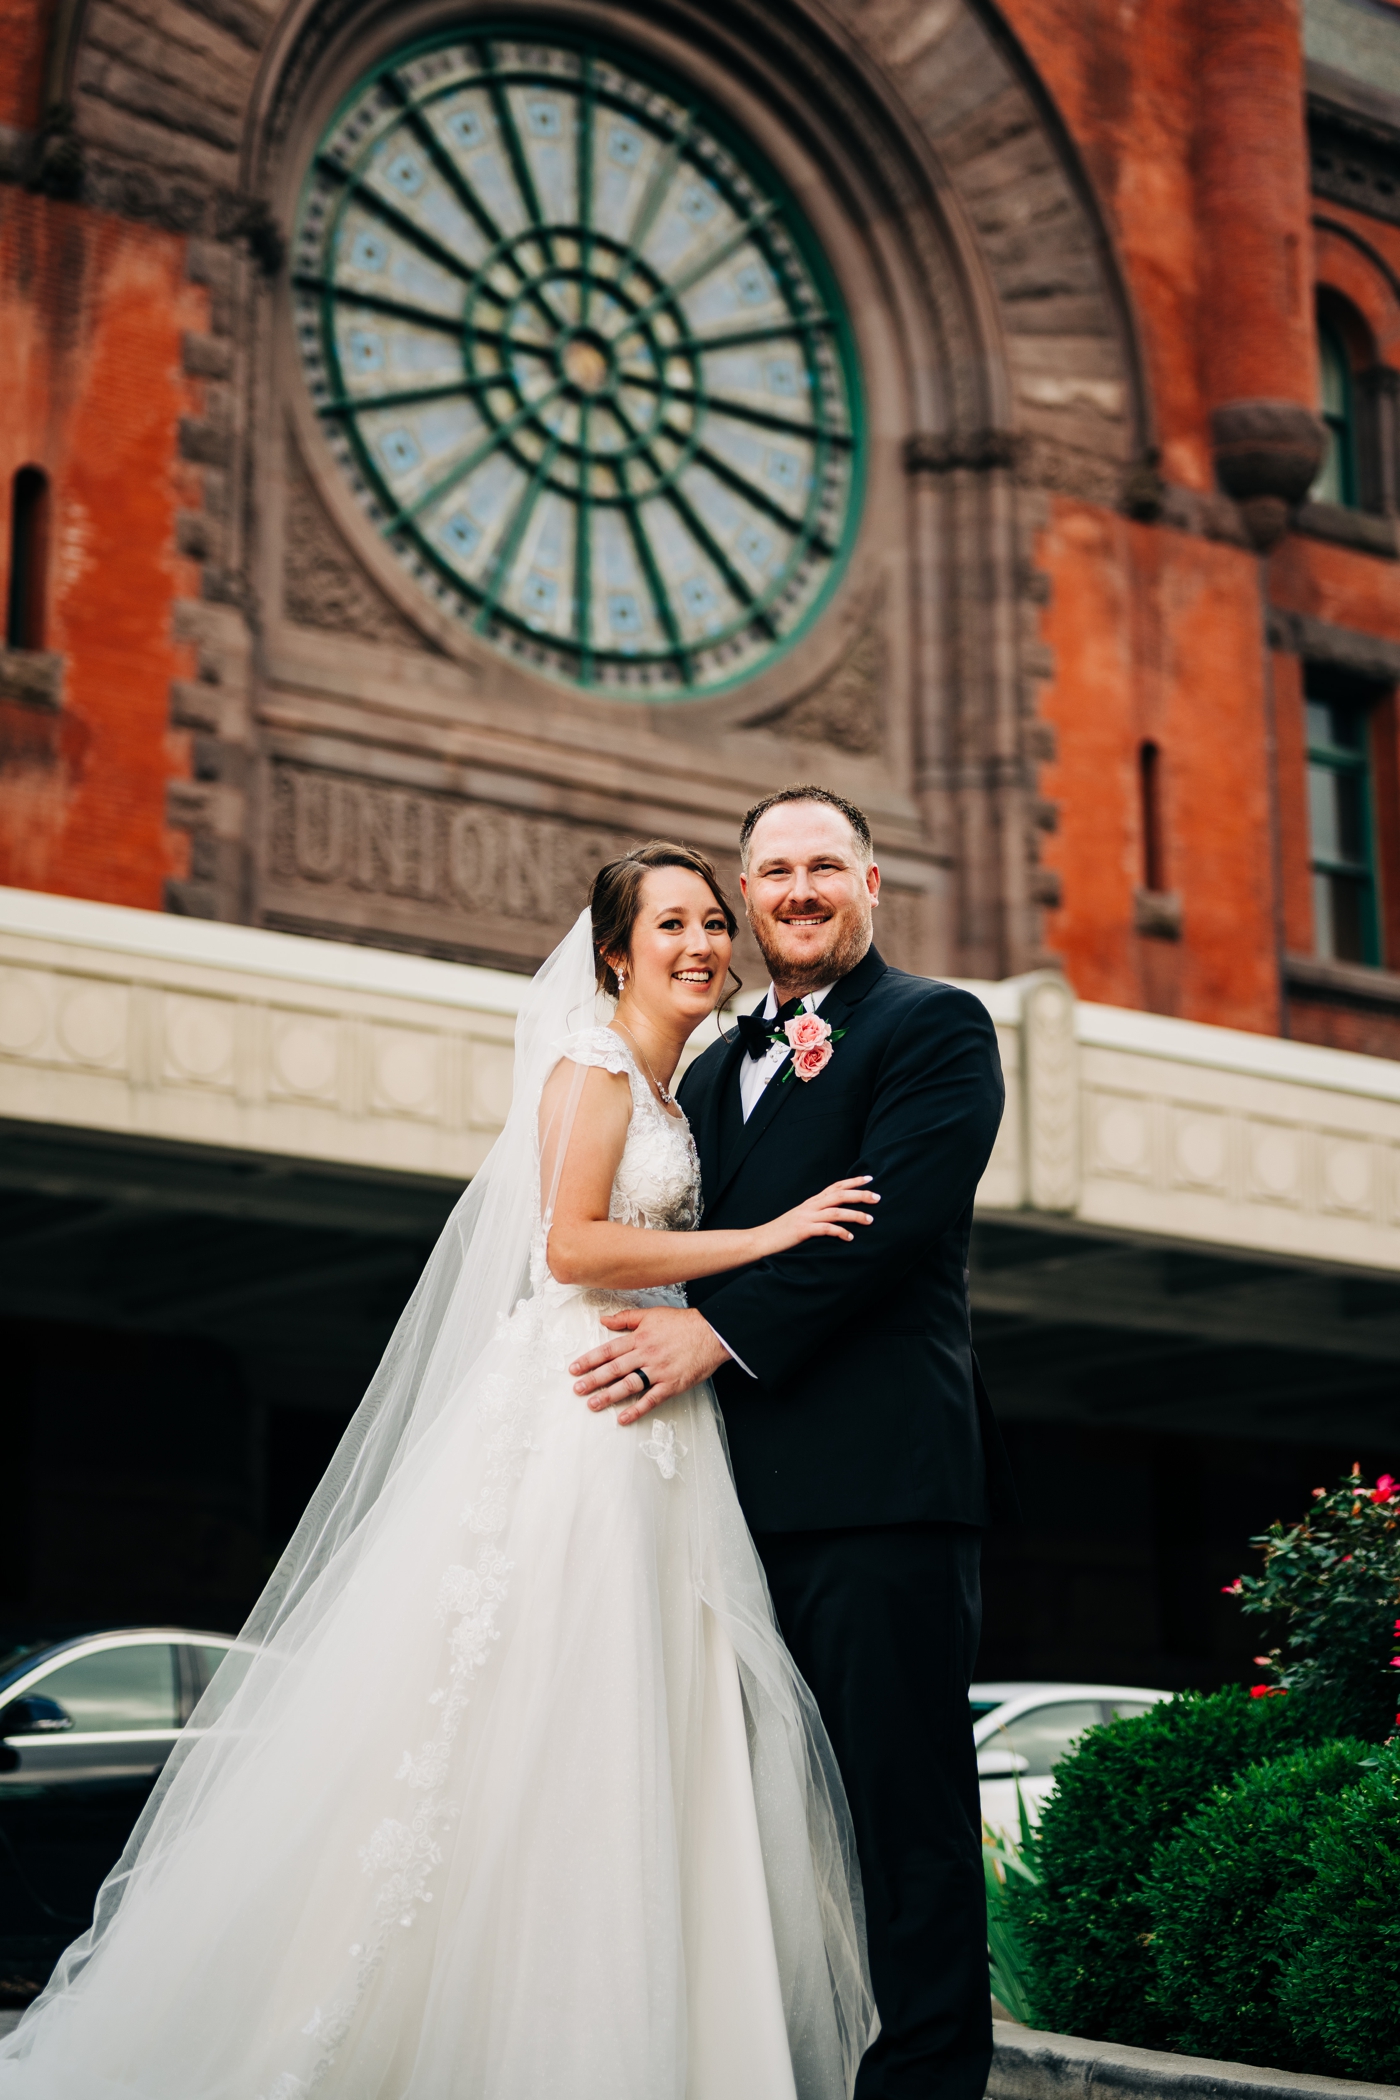 Bride and groom portraits at Union Station